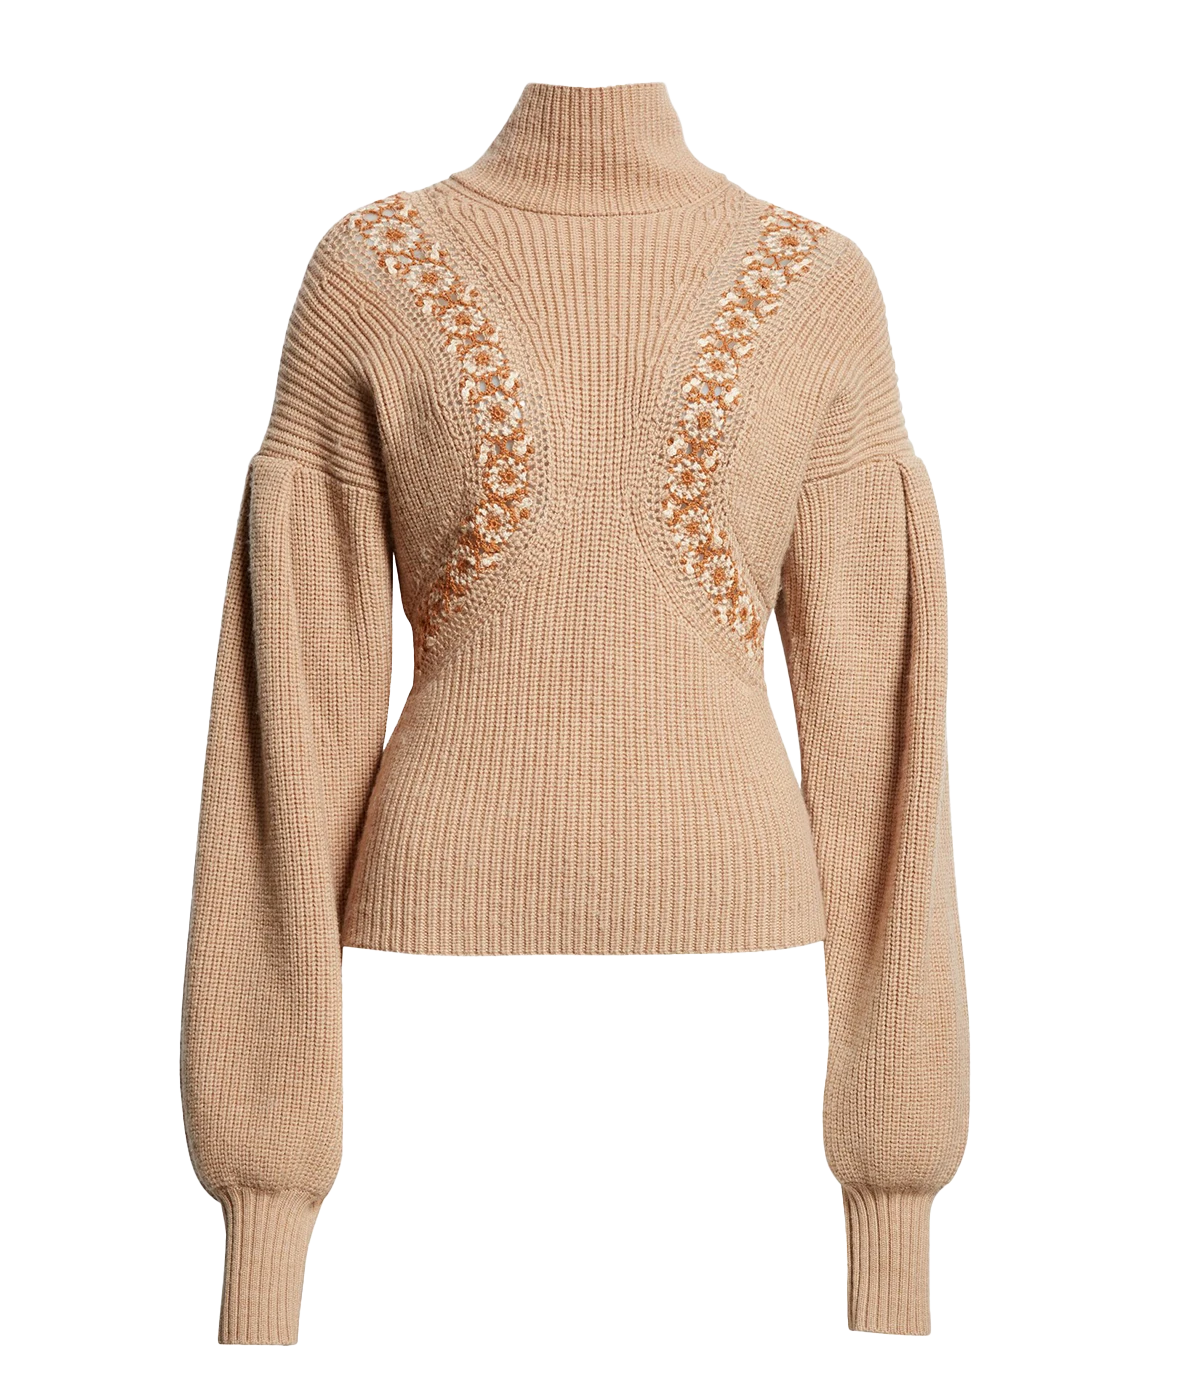 High neck pullover style sweater. Blouson long sleeves, crochet floral detail, ribbed knit. Retro bohemian inspired turtleneck.